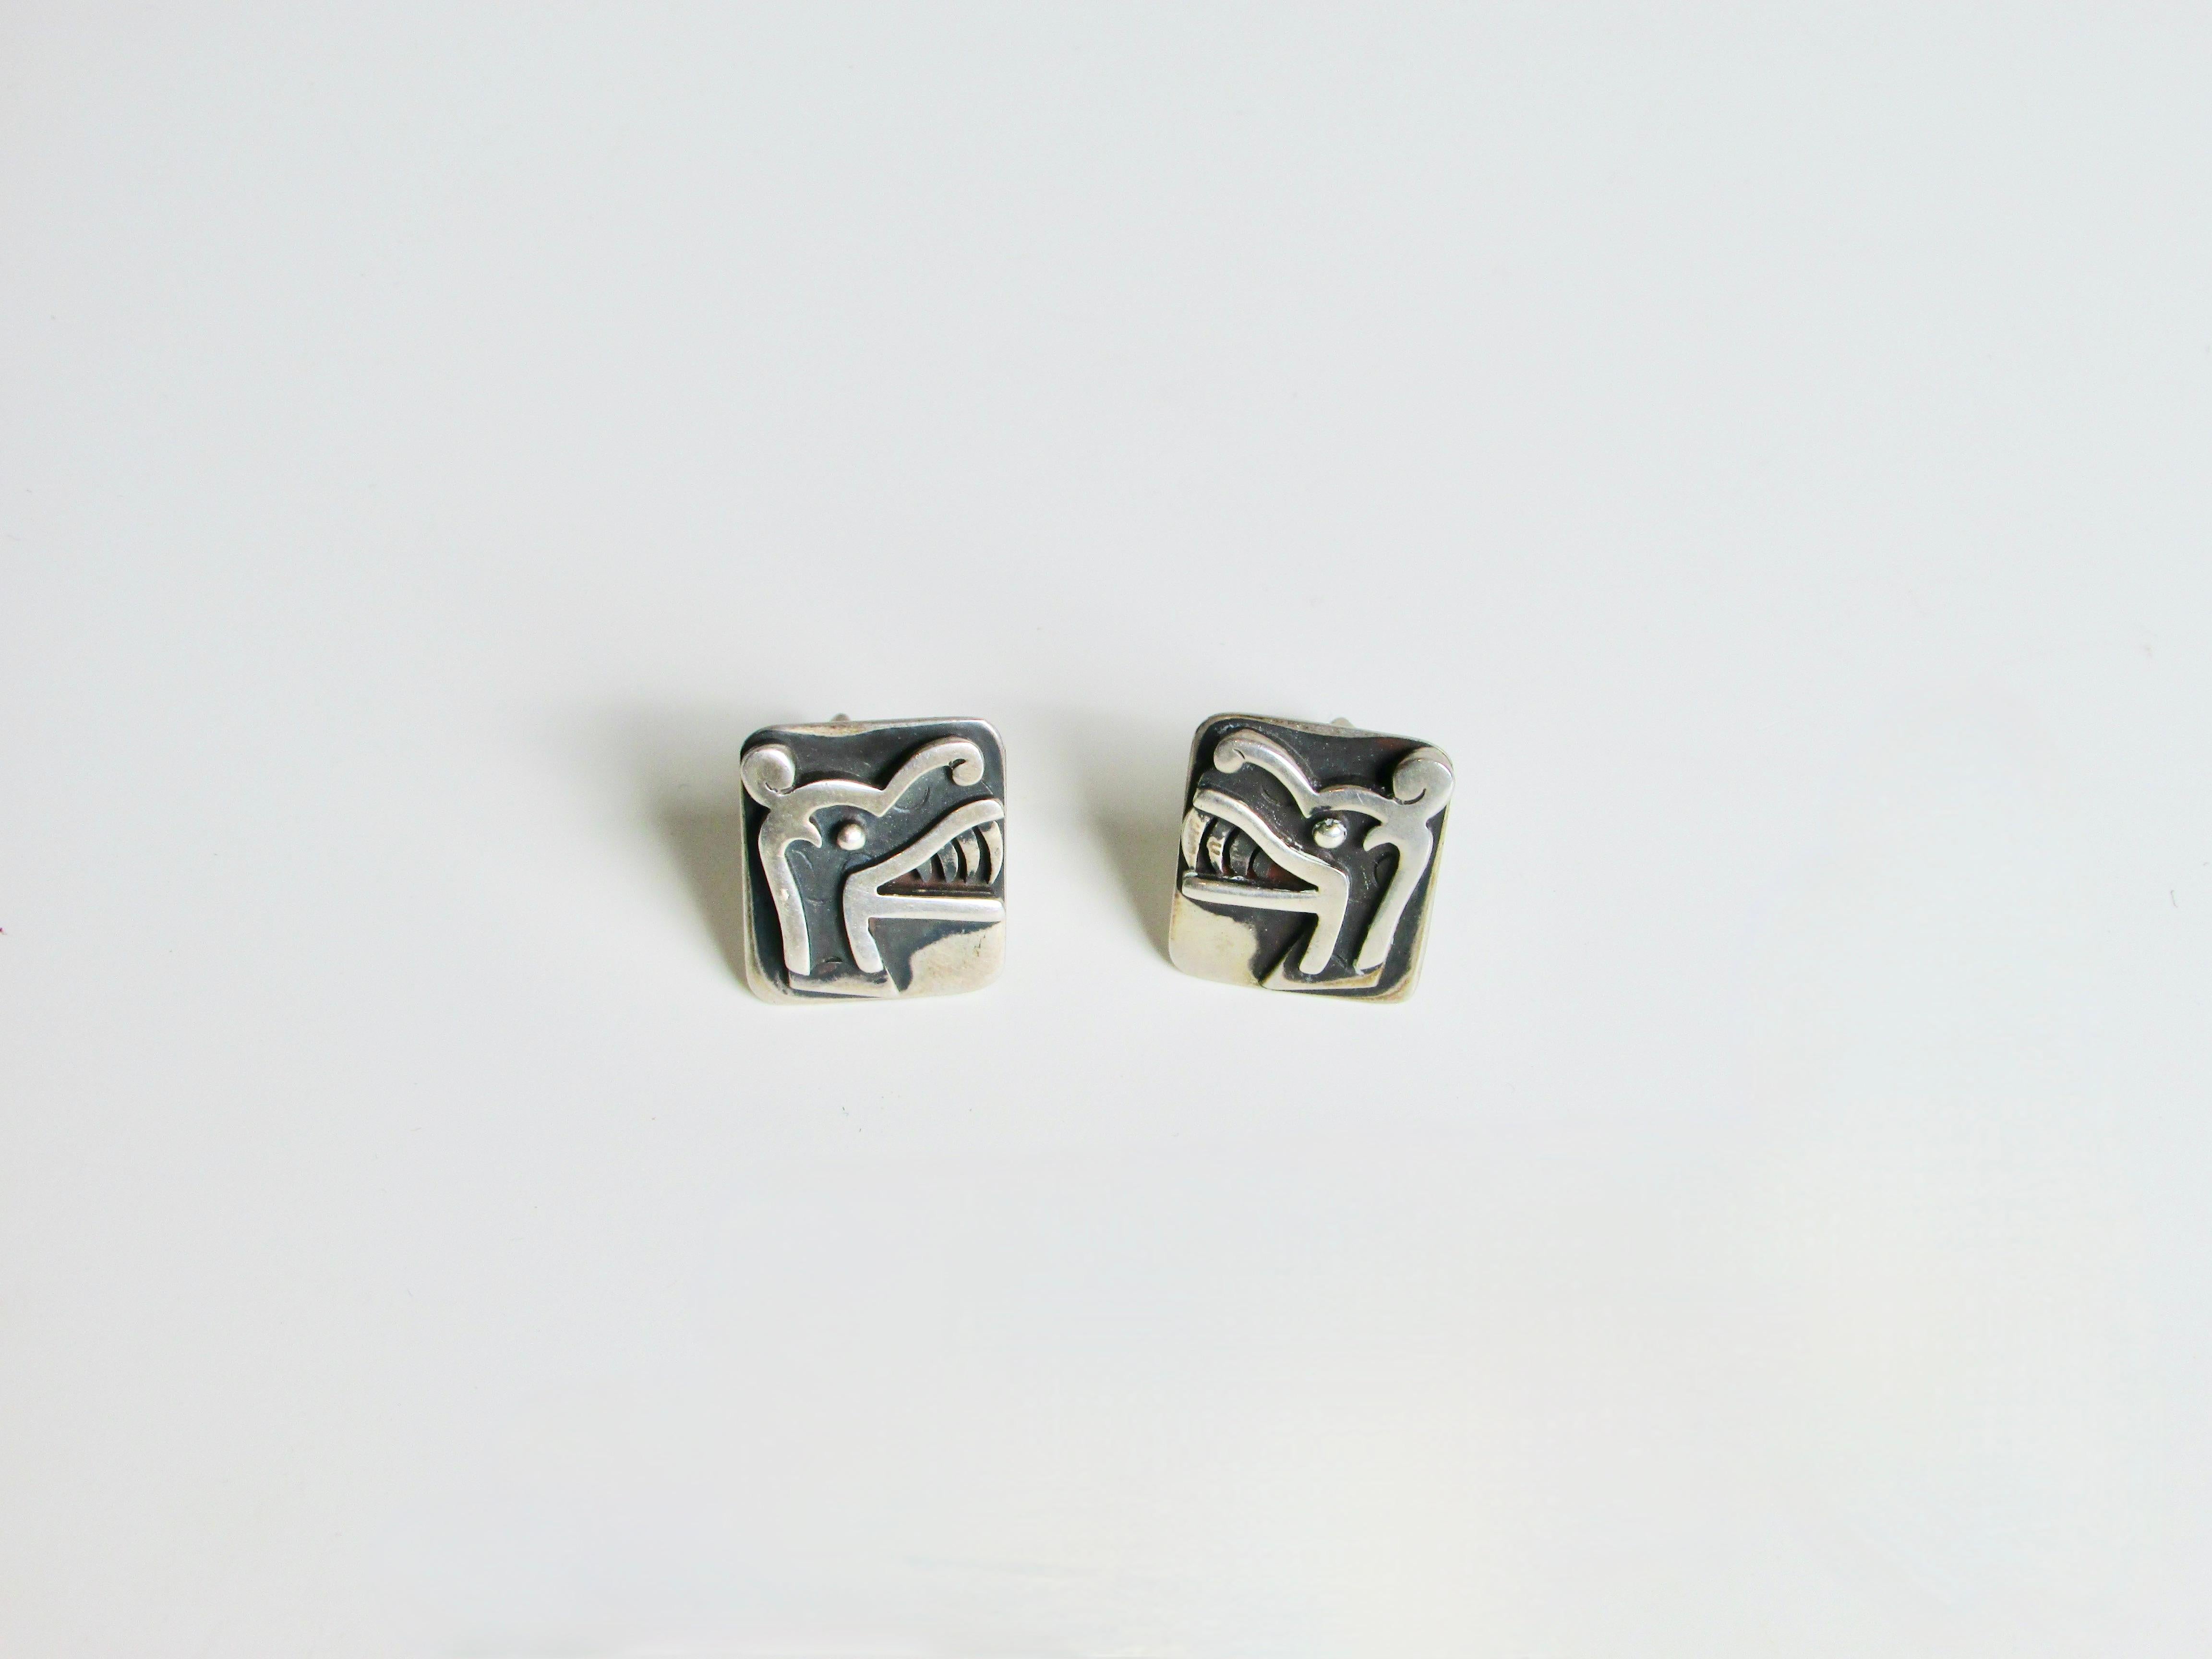 Pair of Miguel Garcia Martinez Modernist Taxco Mexico Sterling Cuff Links In Good Condition For Sale In Ferndale, MI